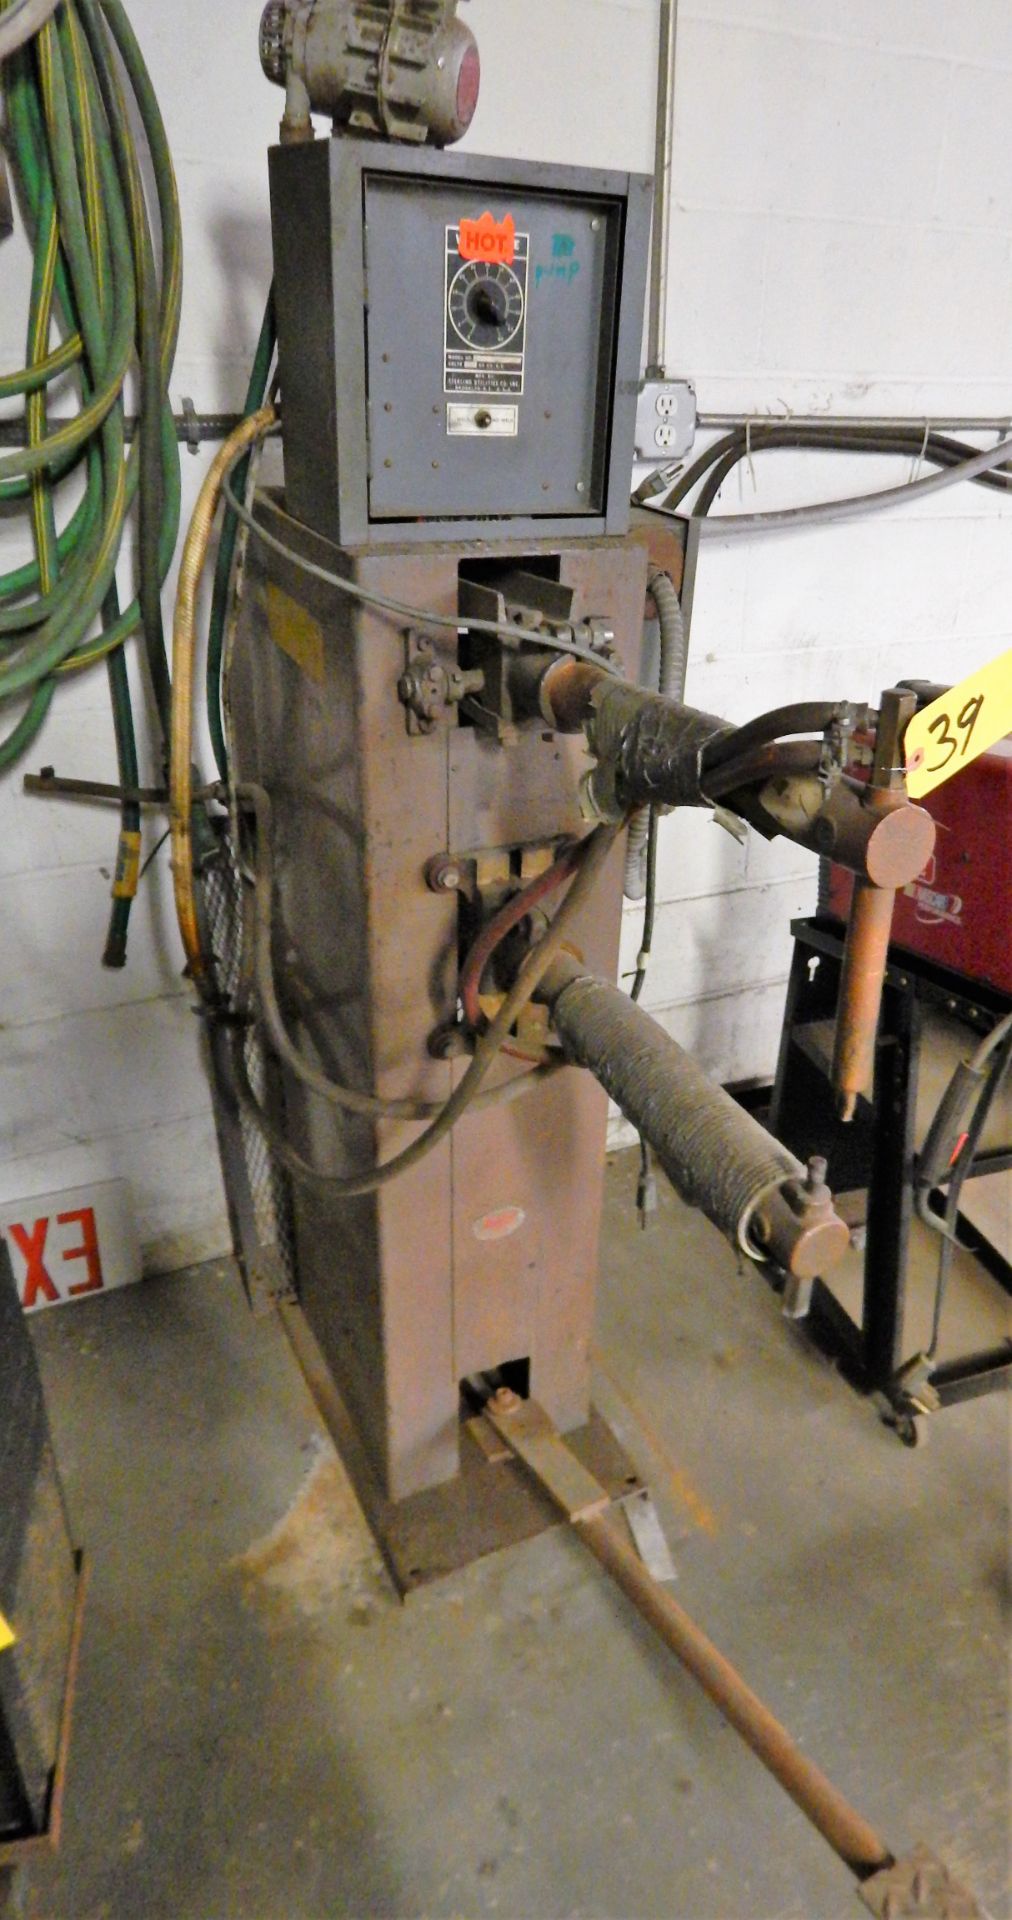 ALPHIL APPROXIMATELY 30KVA 18" ROCKER ARM TYPE SPOT WELDER WITH STERLING WELD TIMER CONTROLS